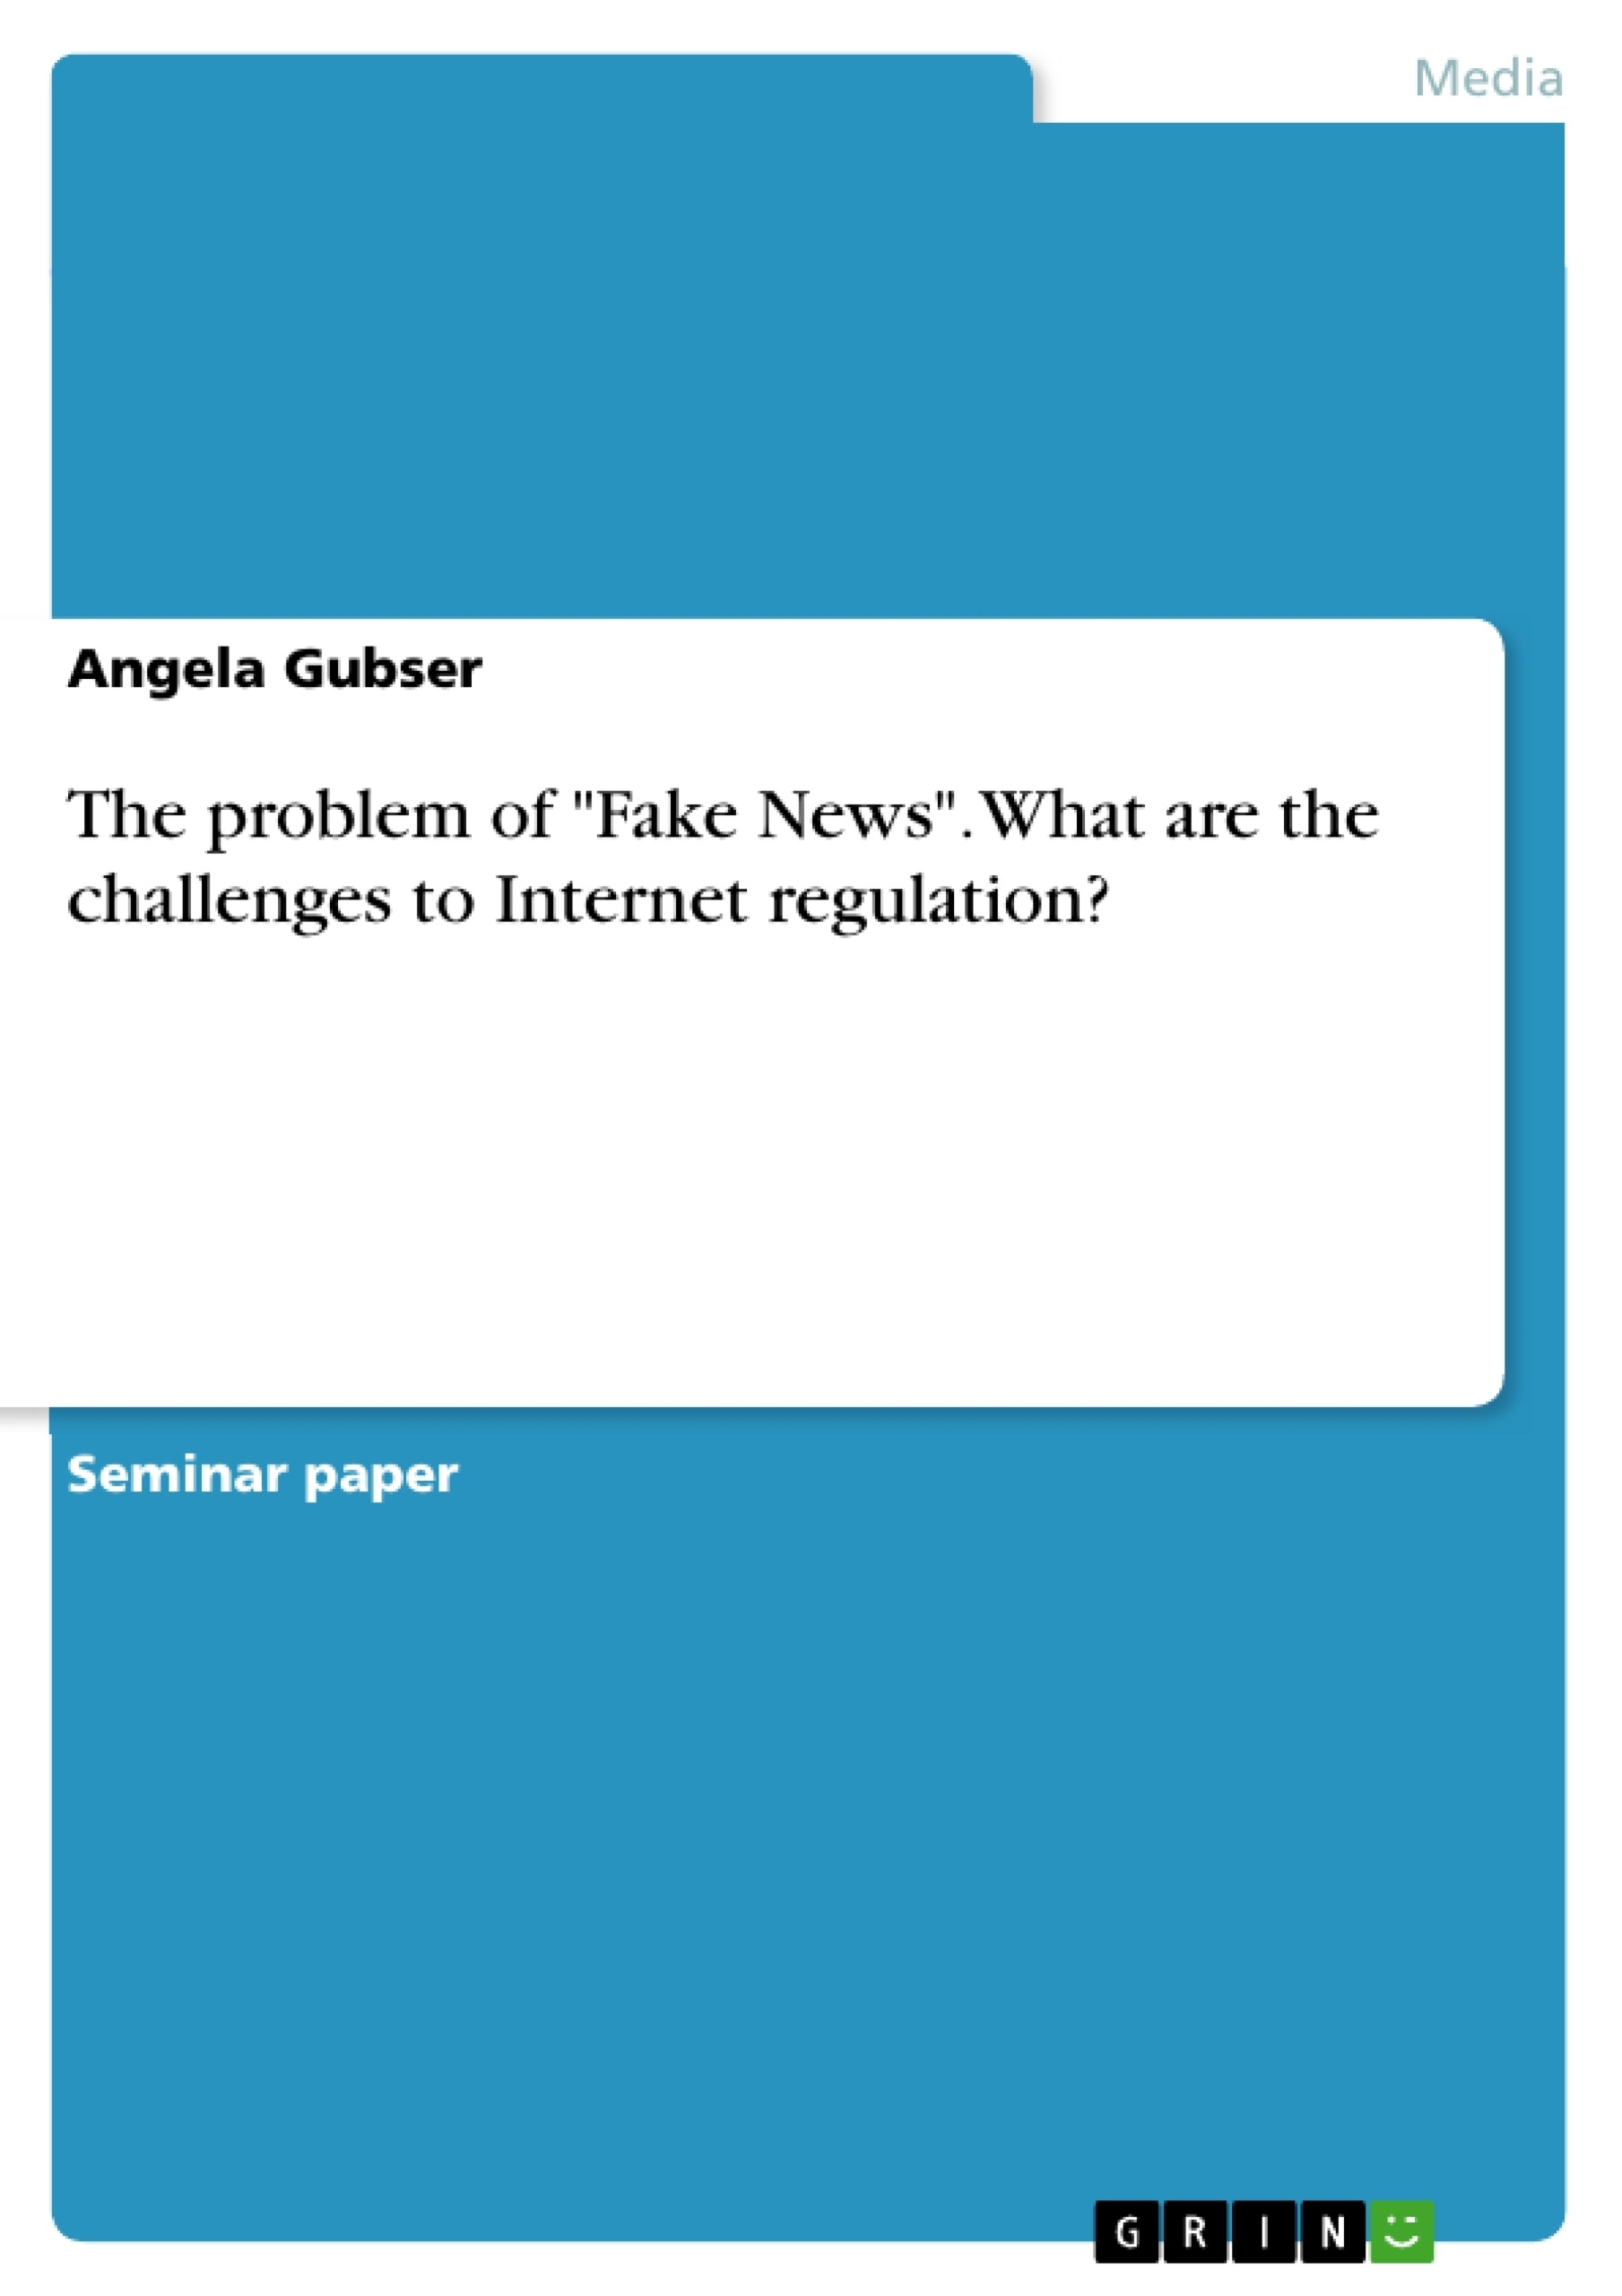 Title: The problem of "Fake News". What are the challenges to Internet regulation?